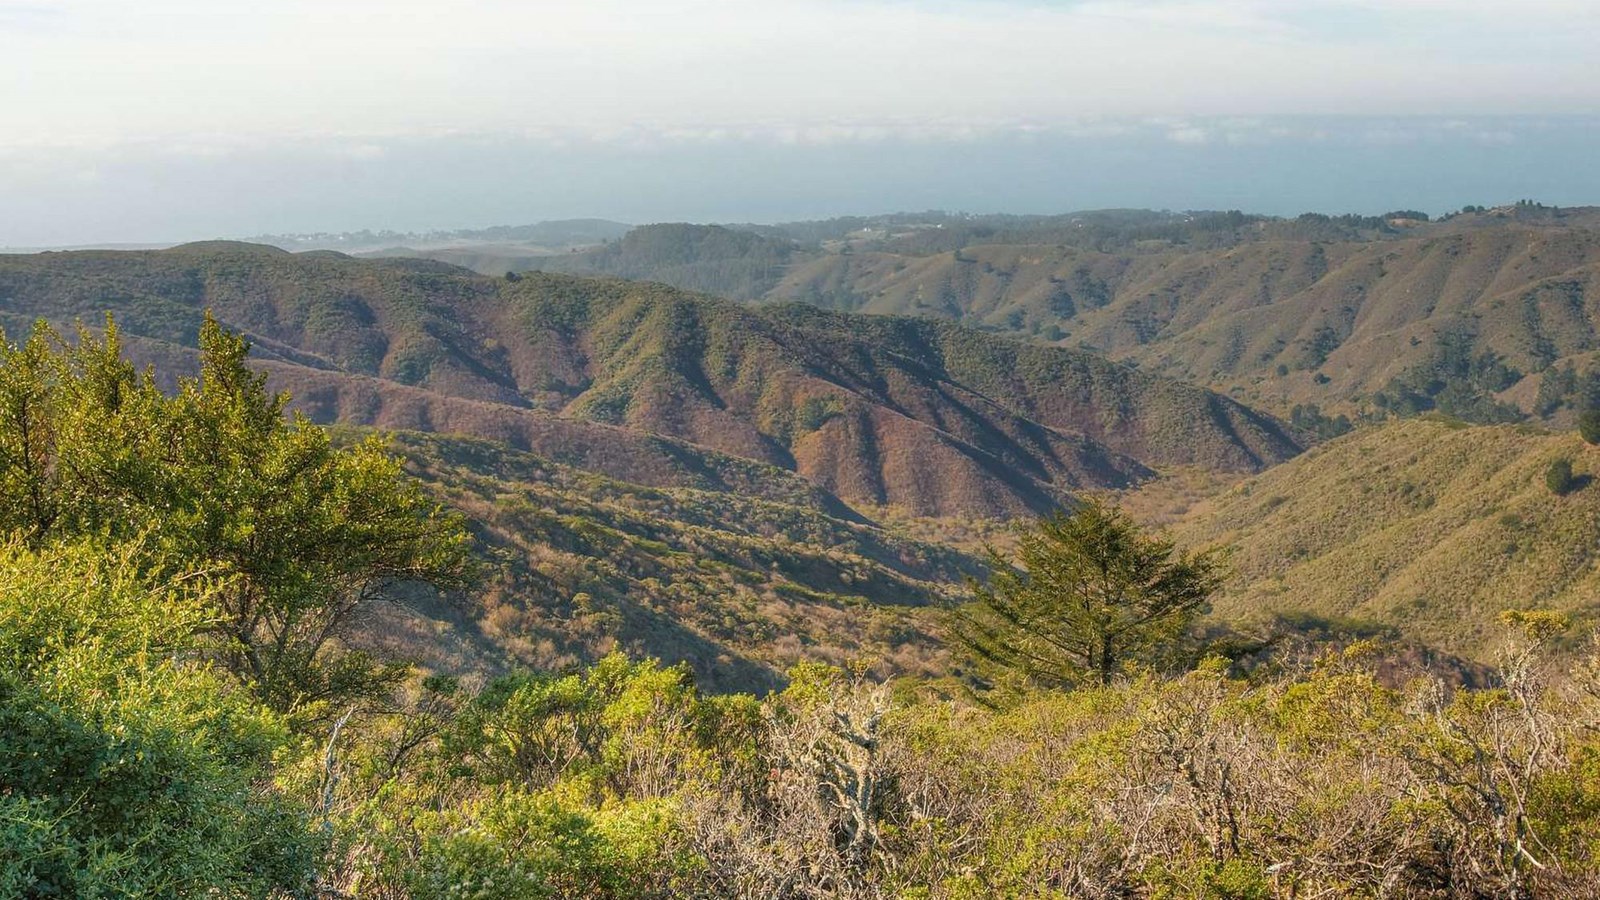 The dramatic view atop Rancho Corral de Tierra, with dark brown ridge lines giving way to the ocean 